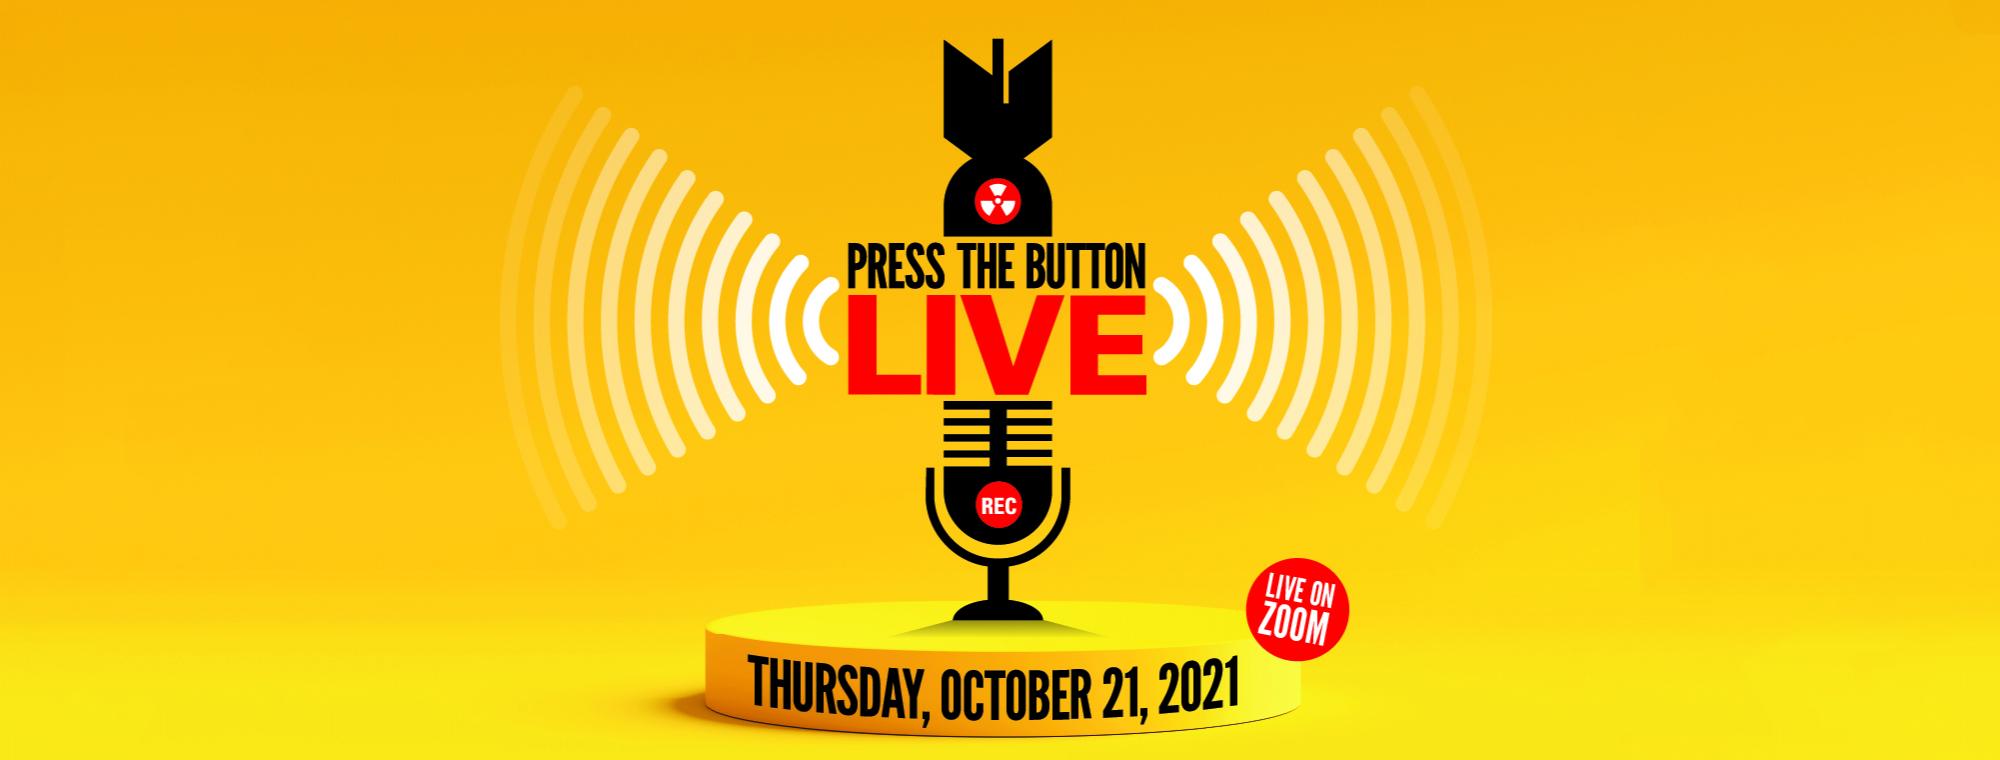 Press The Button Live Oct 21